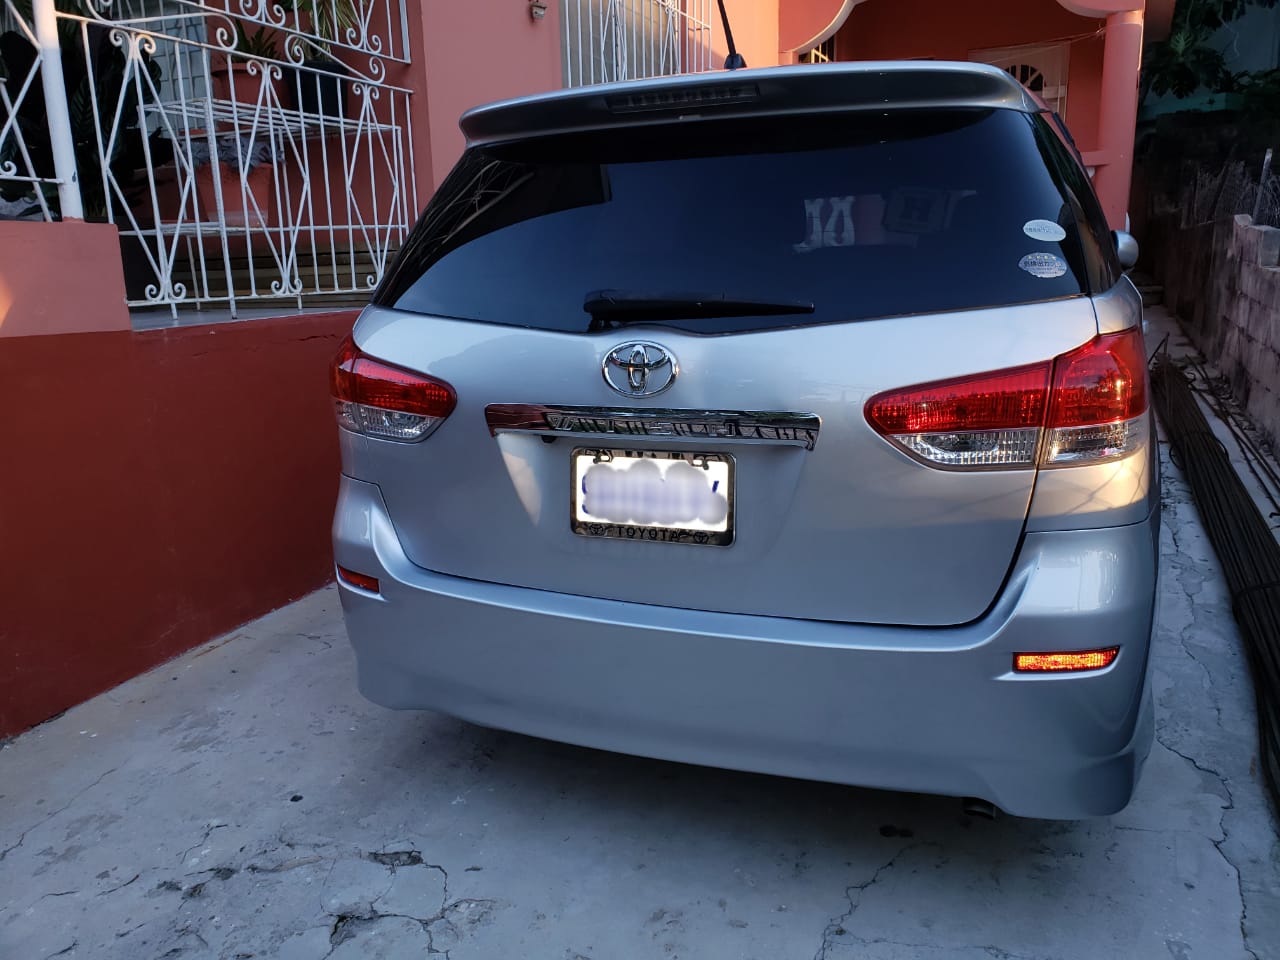 Cars For Sale In Jamaica Under 500 000 - Feqtuzh